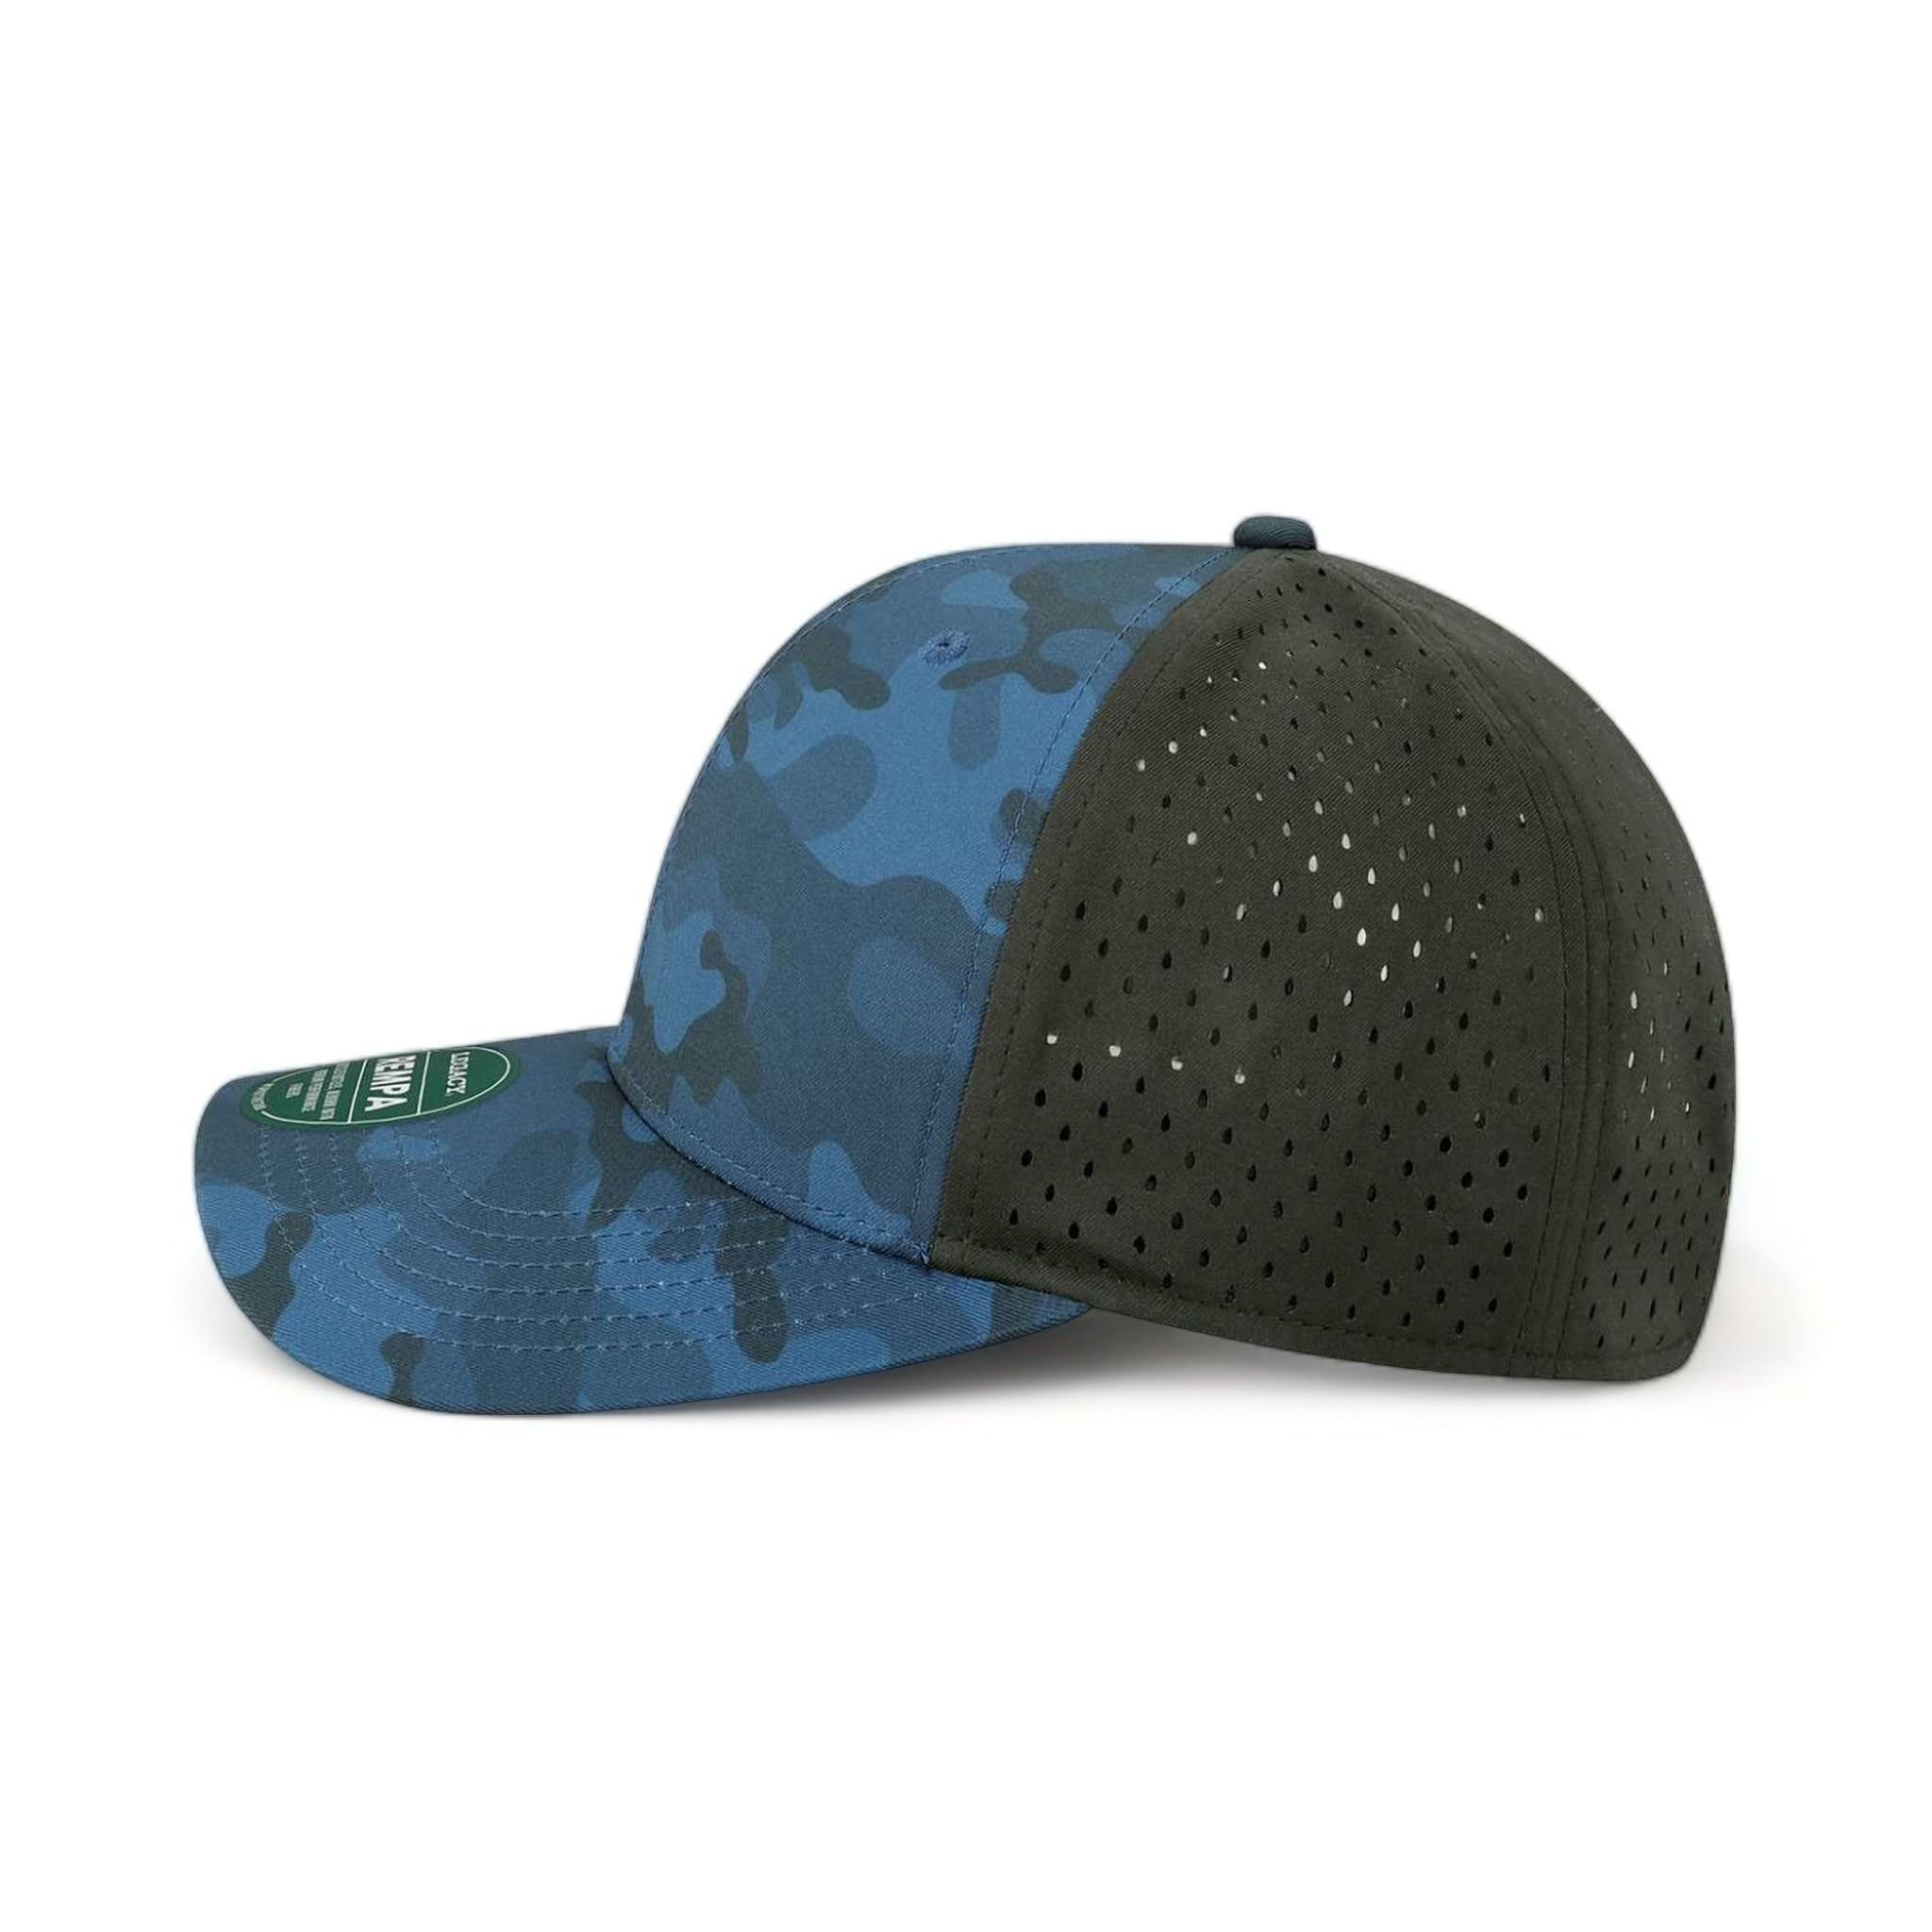 Side view of LEGACY REMPA custom hat in blue camo and black